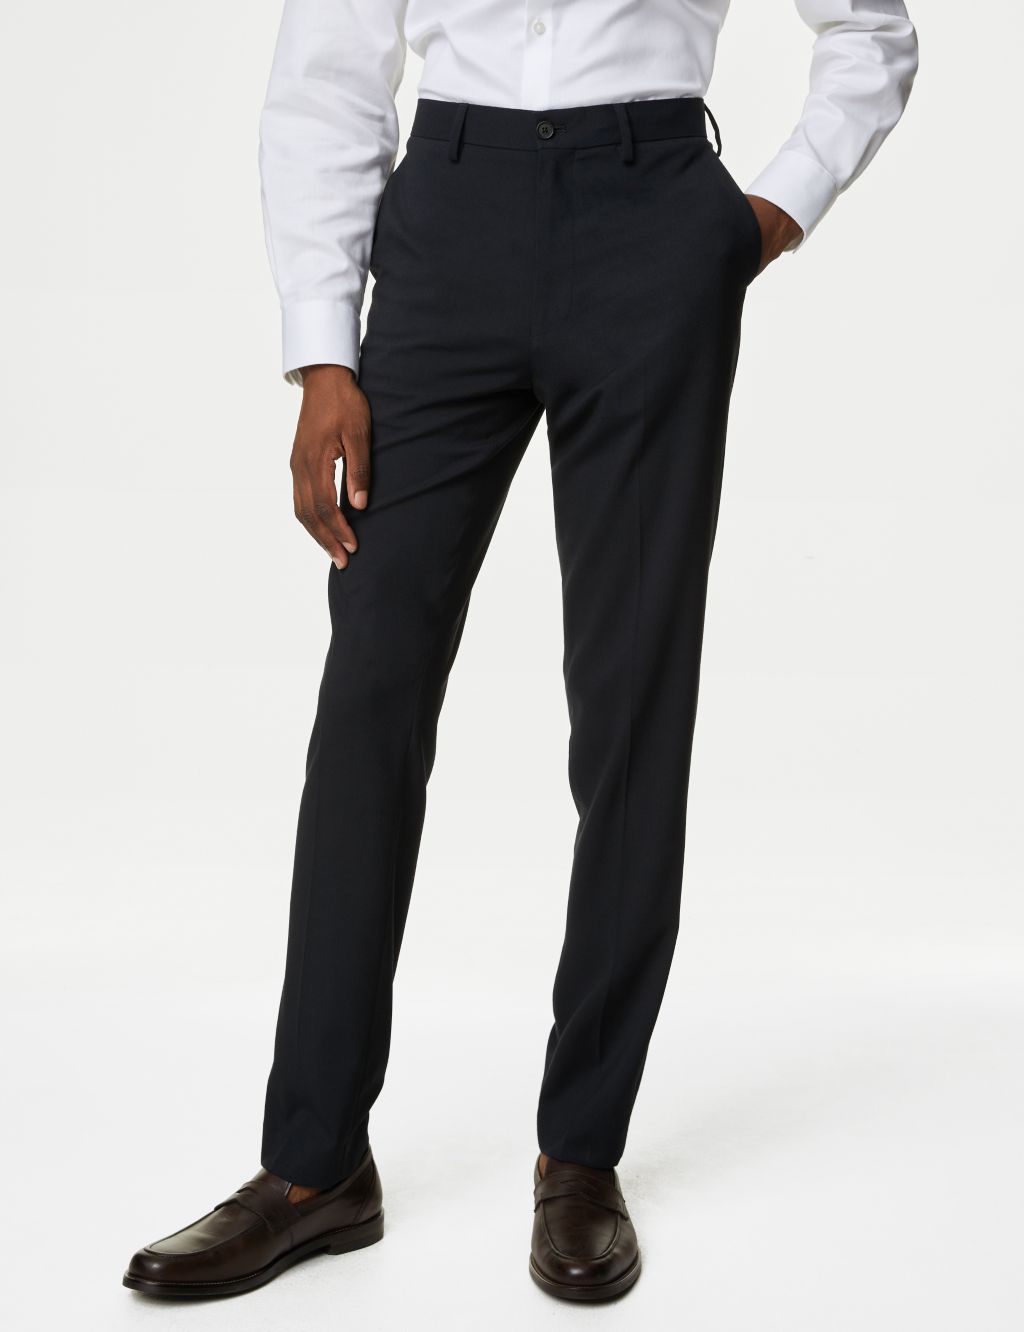 Slim Fit Flat Front Stretch Trousers image 2